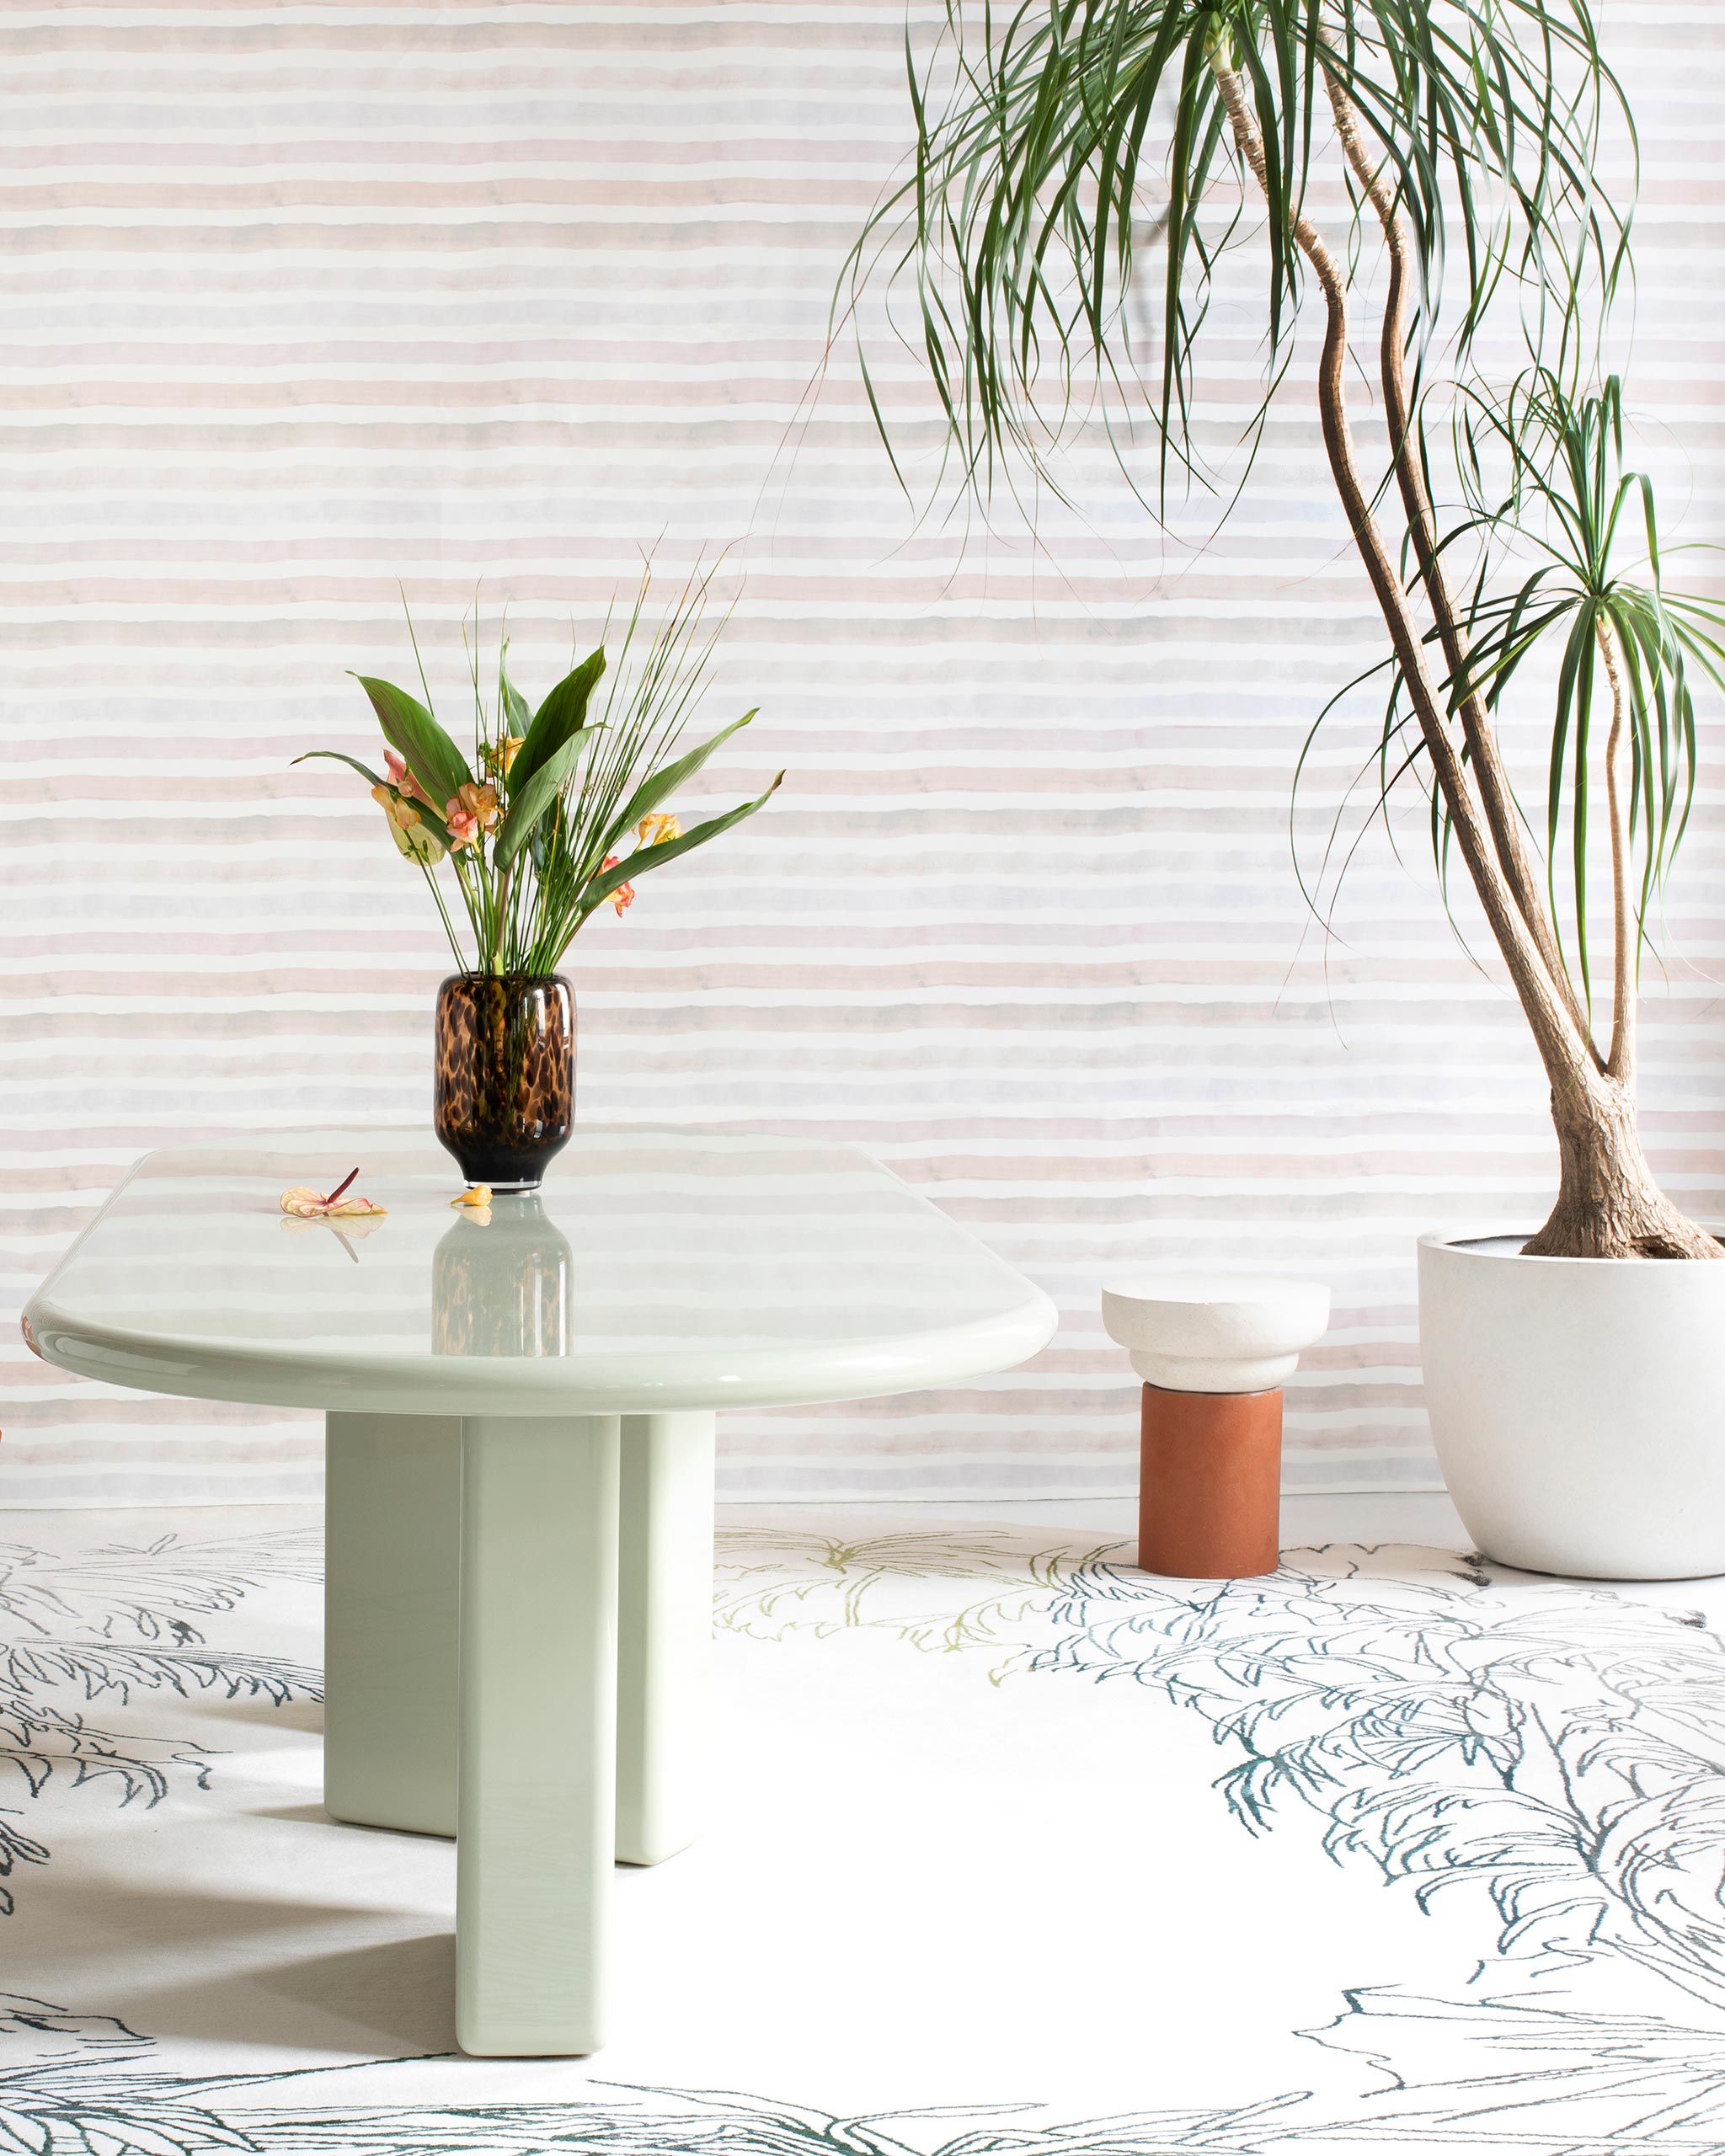 A modernist living space filled with plants and an accent wall papered in a painterly stripe print in pink, cream and white.